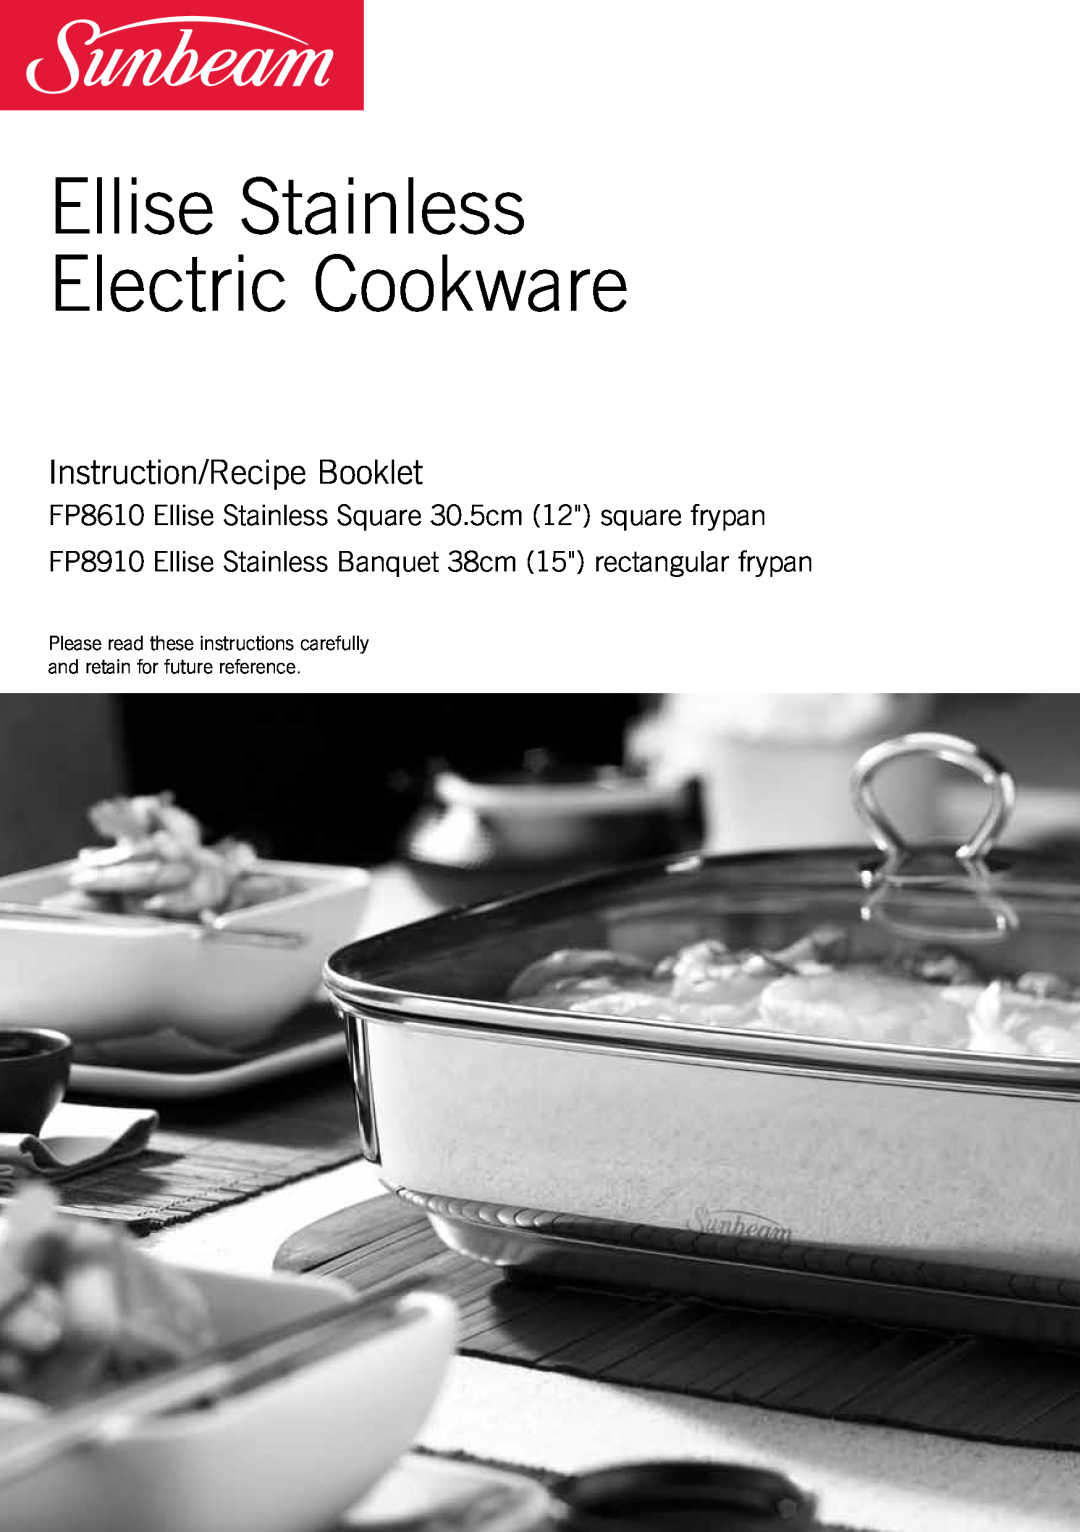 Sunbeam FP8910, FP8610, FP8920 manual Instruction Booklet, Ellise Stainless Electric Cookware 